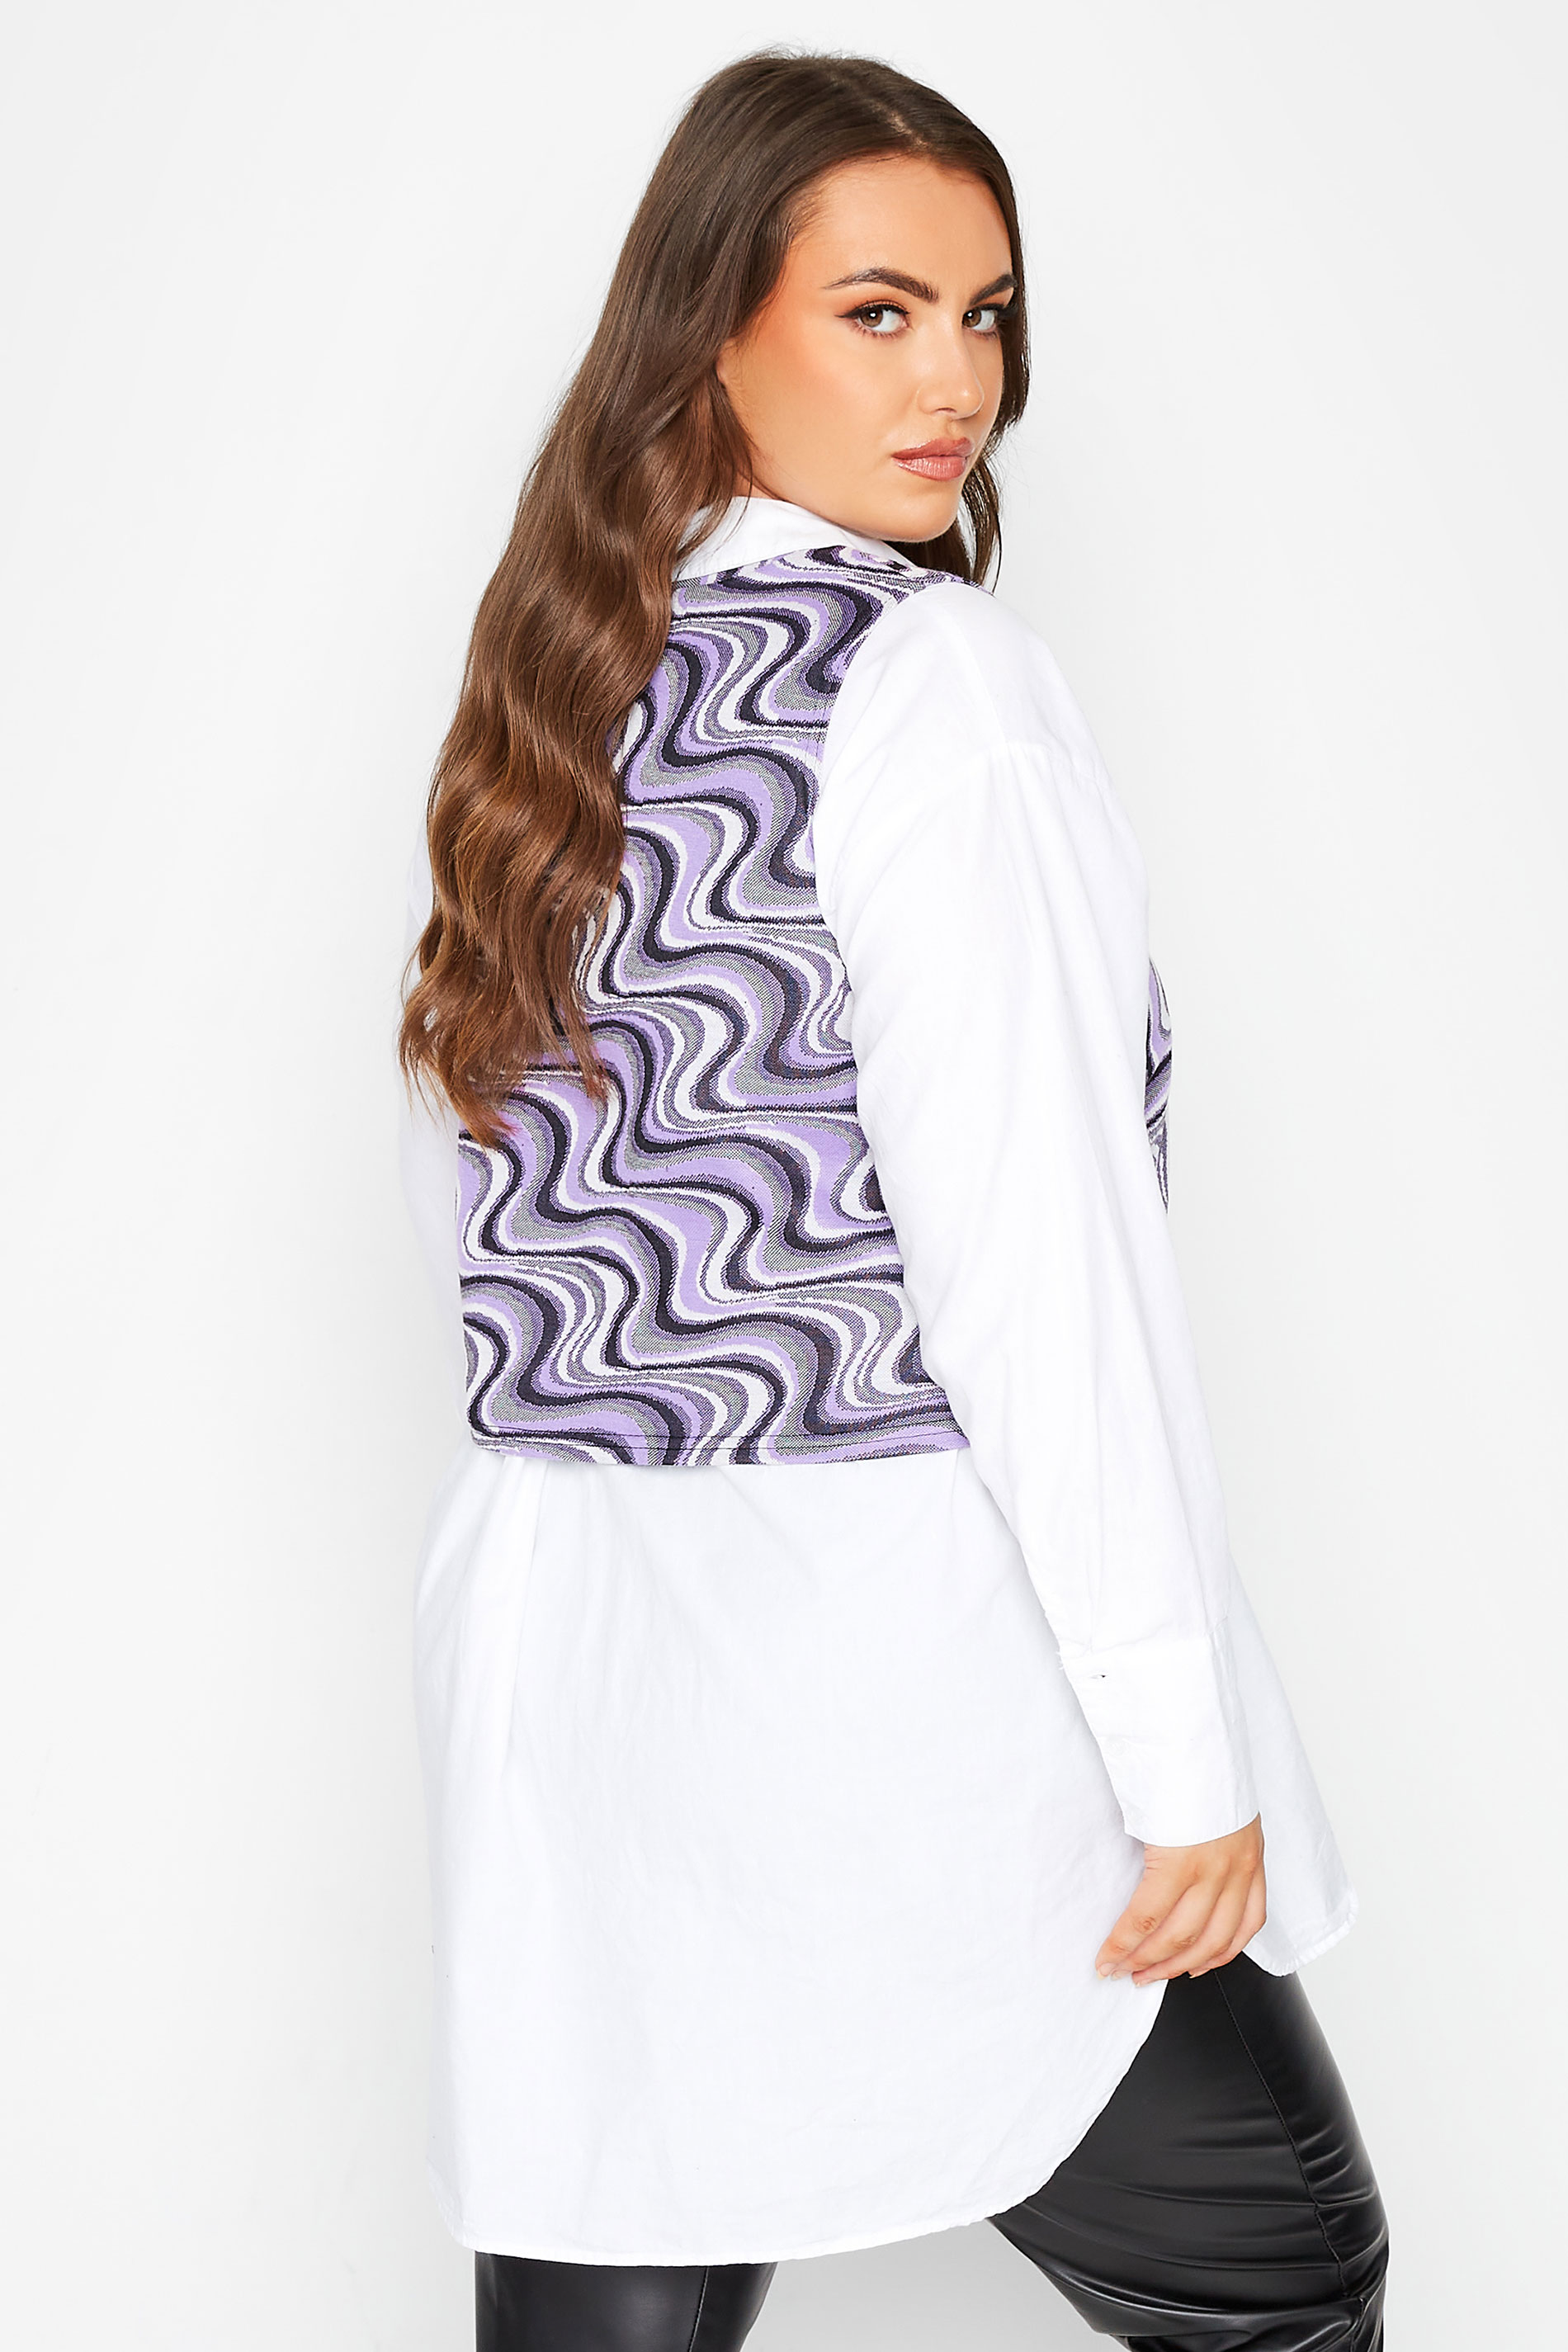 LIMITED COLLCTION Purple Swirl Print Knitted Vest Top | Yours Clothing 3